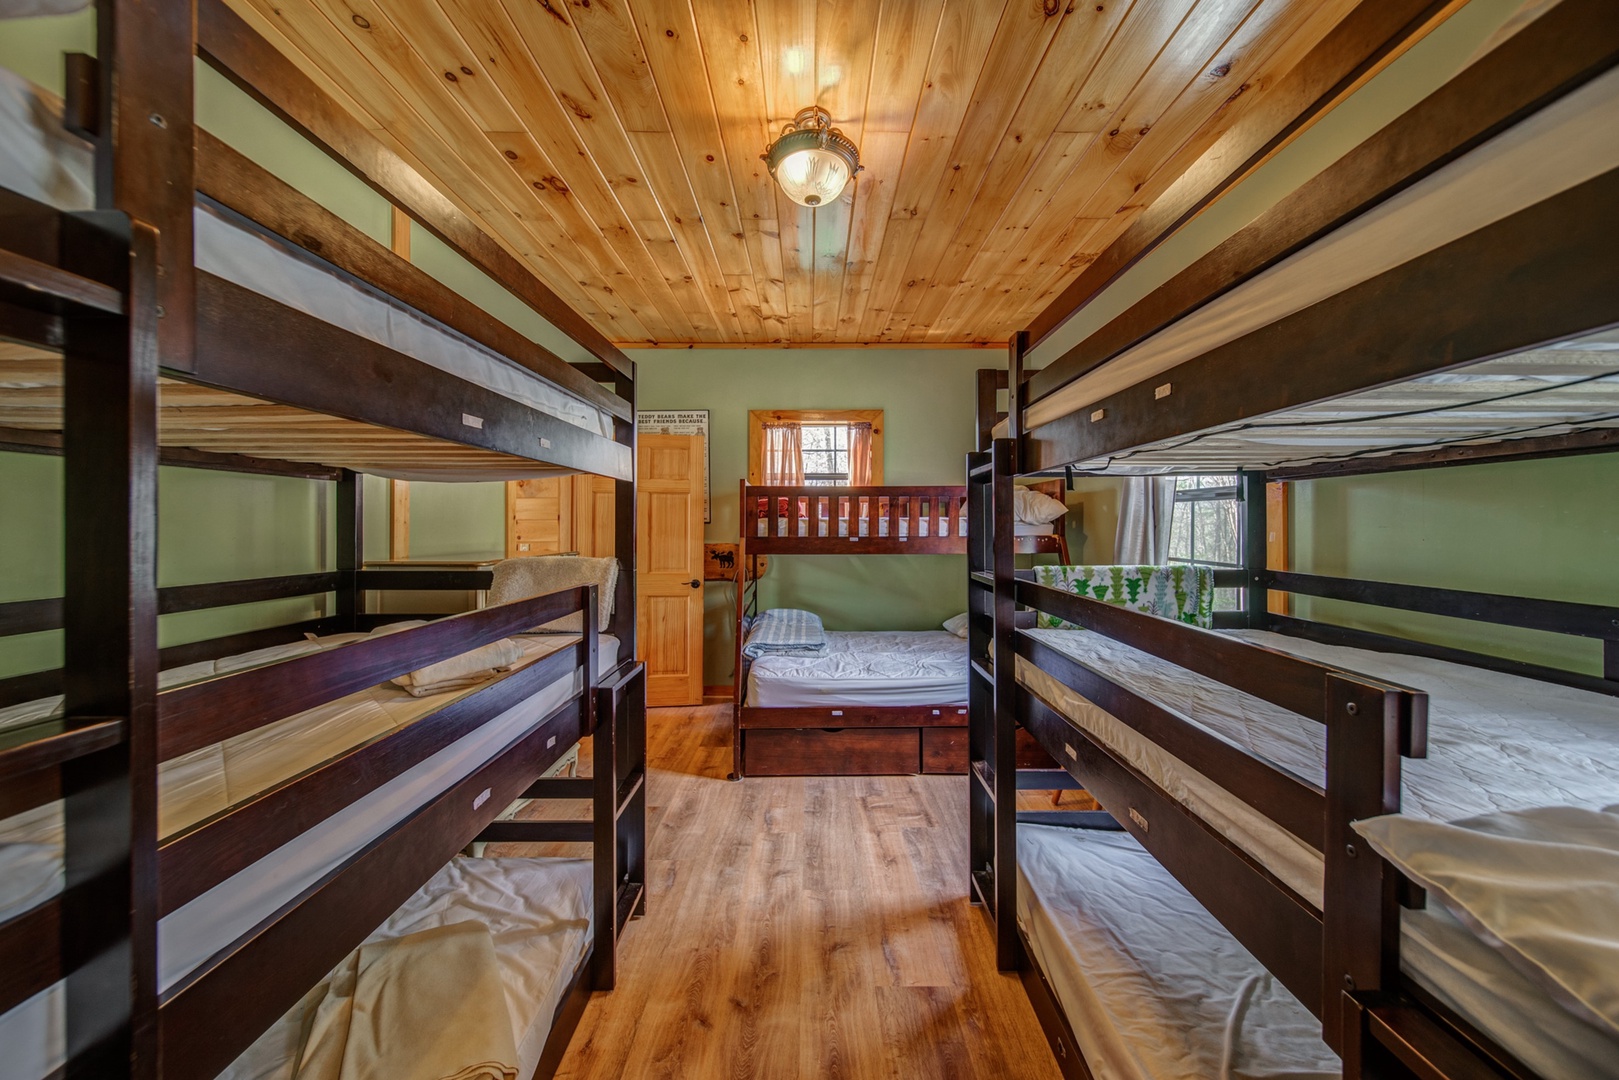 The Bunk Room offers ample sleeping space with 7 Twin Bunks and 1 Full Bunk